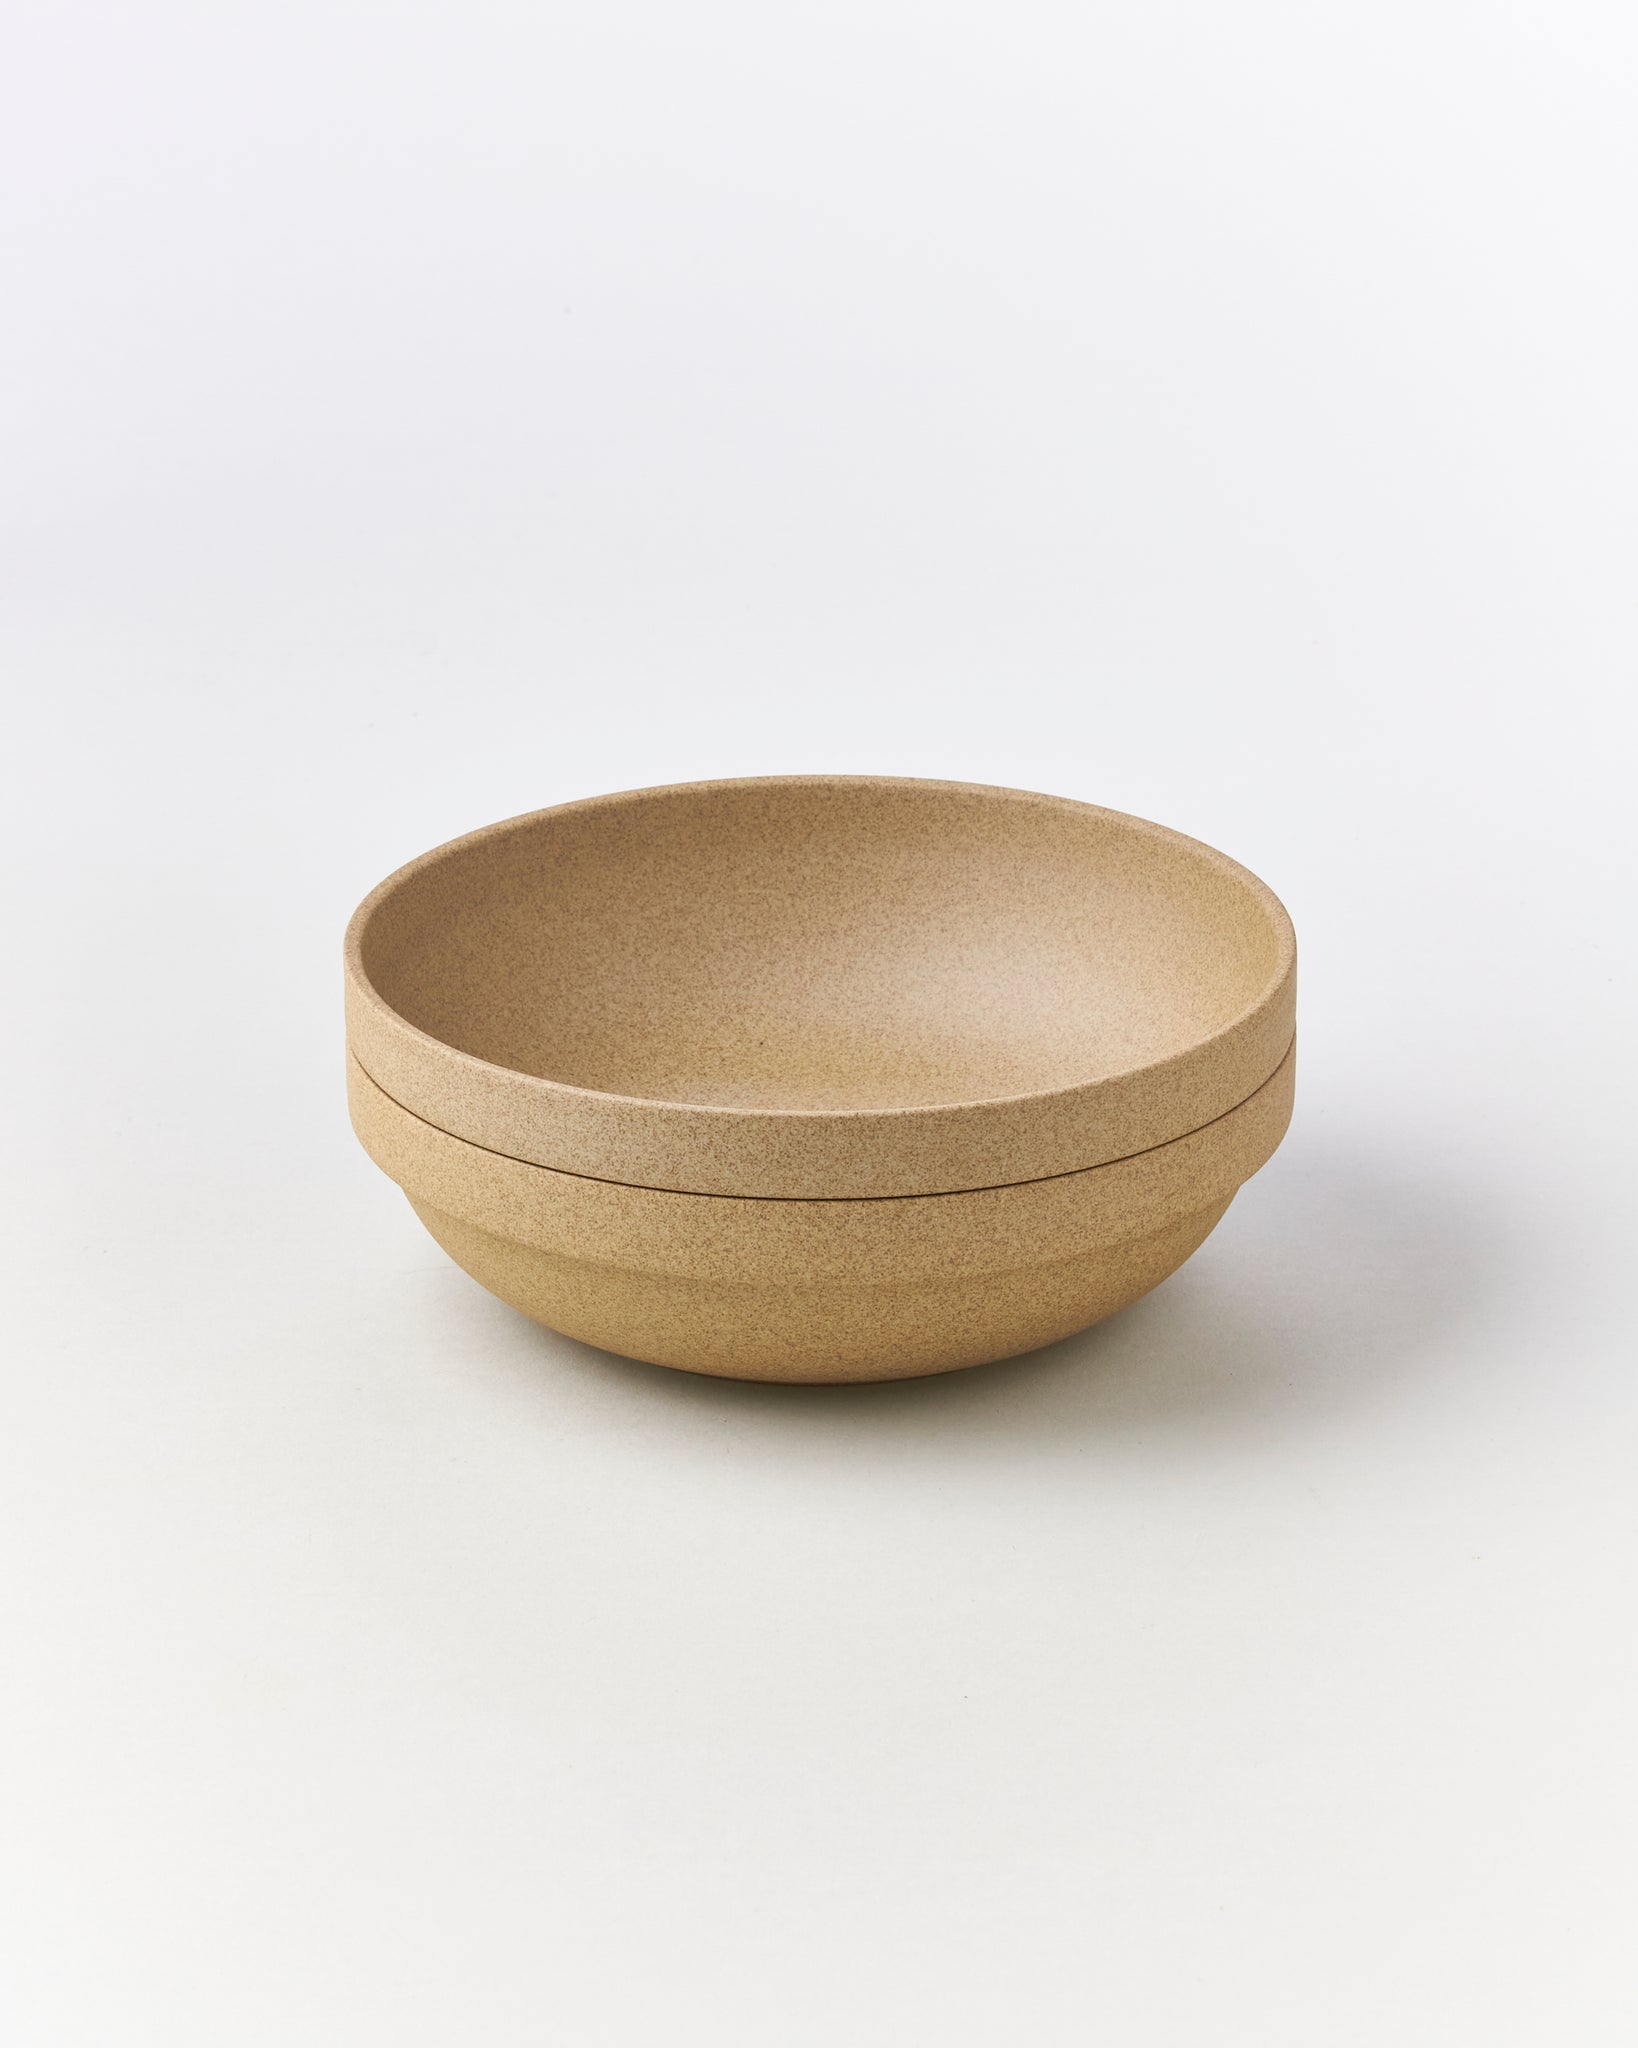 Hasami 7 3/8-inch Round Bowl in Natural